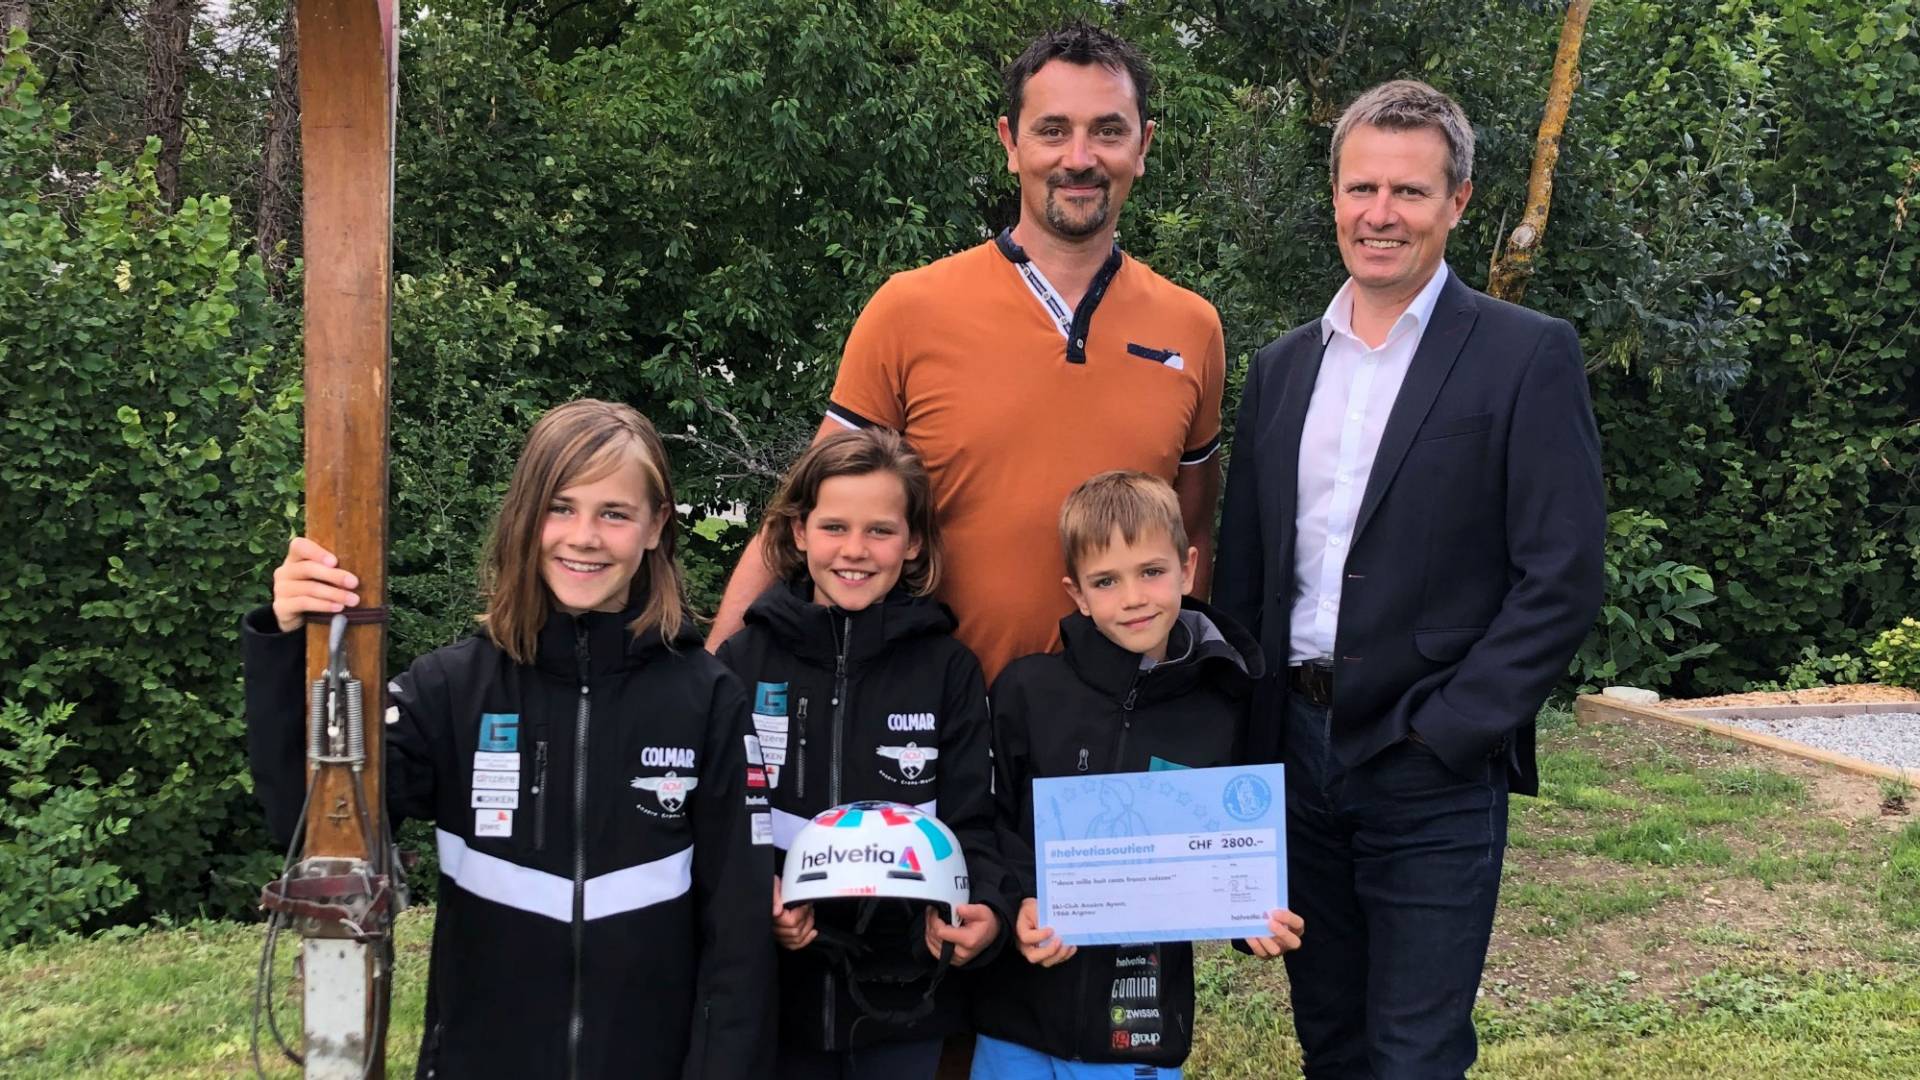  The president of the ski club and his Helvetia customer advisor, plus three young athletes of the ski club, pose with an old wooden ski and the cheque.